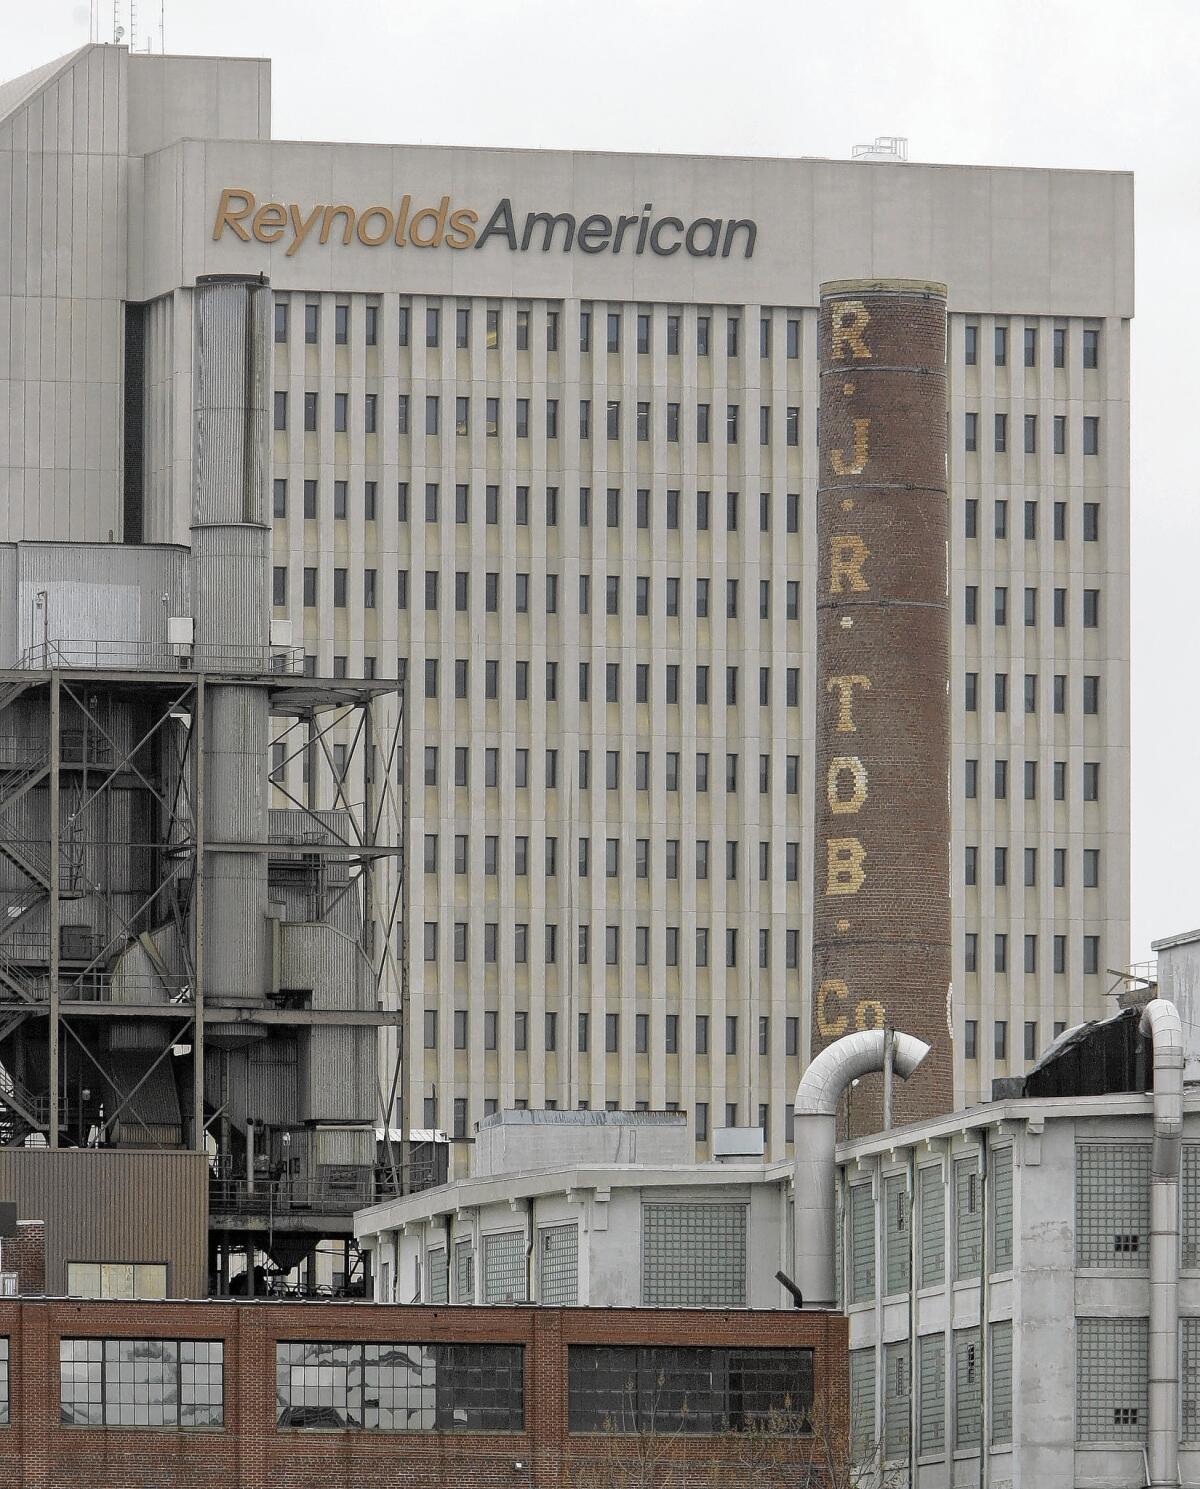 Lawyers for R.J. Reynolds Tobacco, based in Winston-Salem, N.C., say they'll appeal a jury's $23.6 billion in punitive damages for one smoker's death.